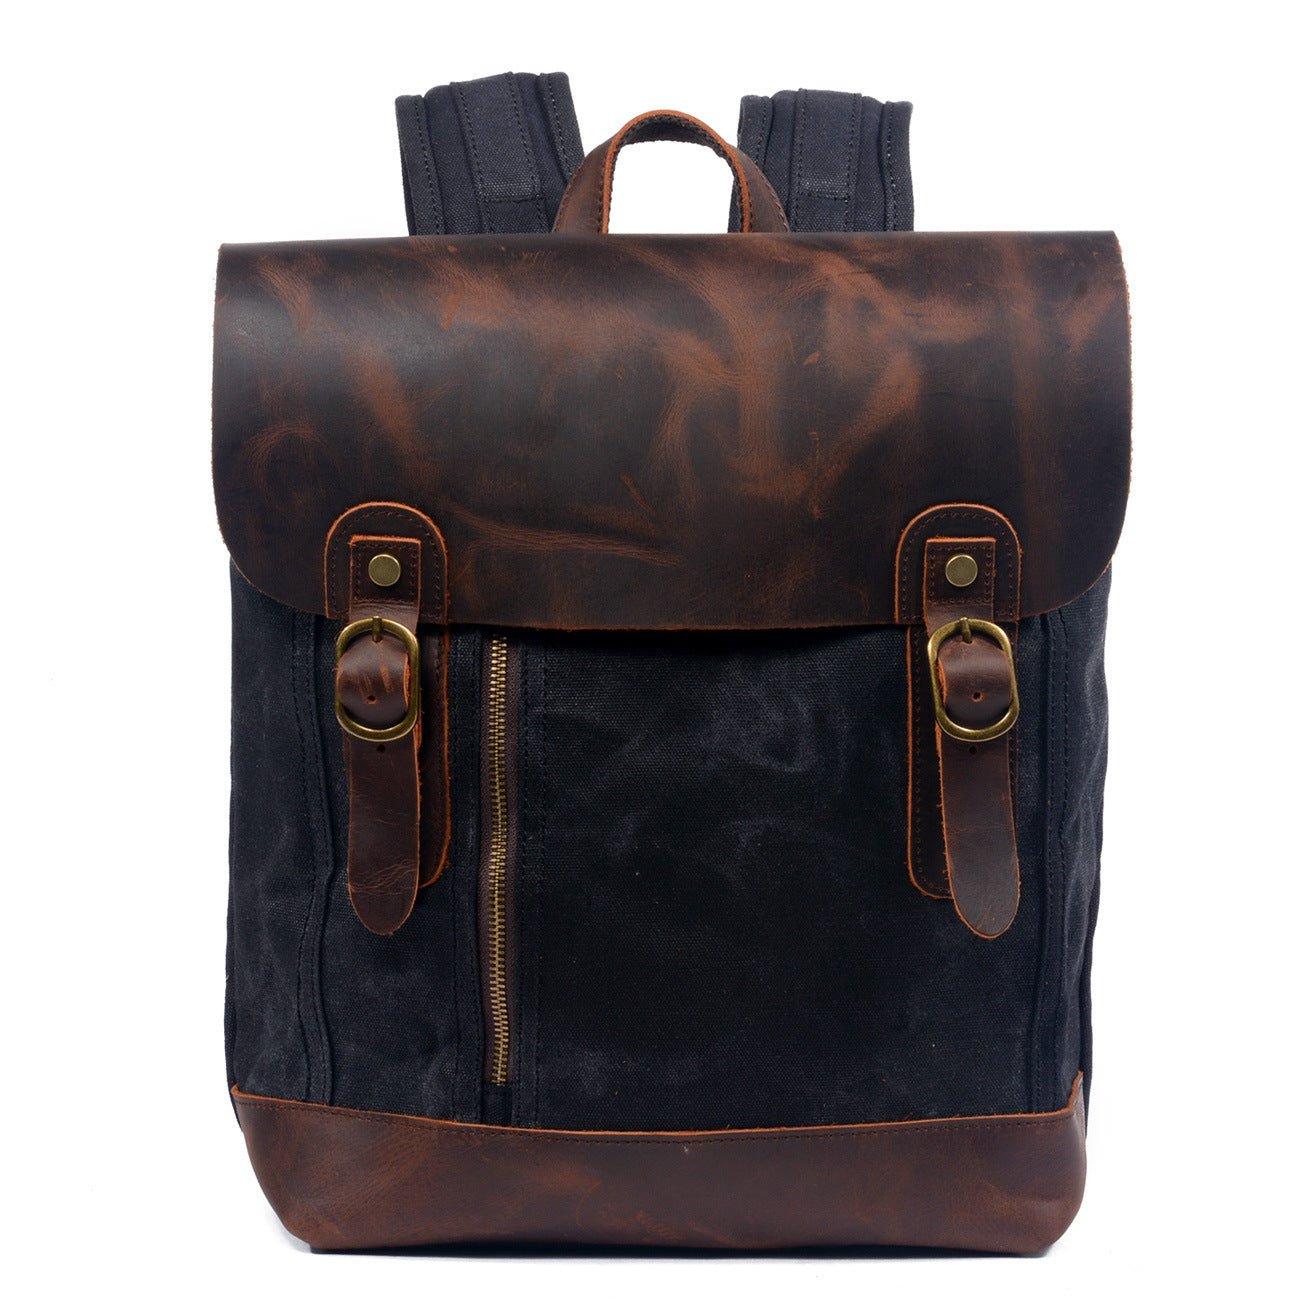 Vintage Leather and Canvas Backpack for Mens - Woosir